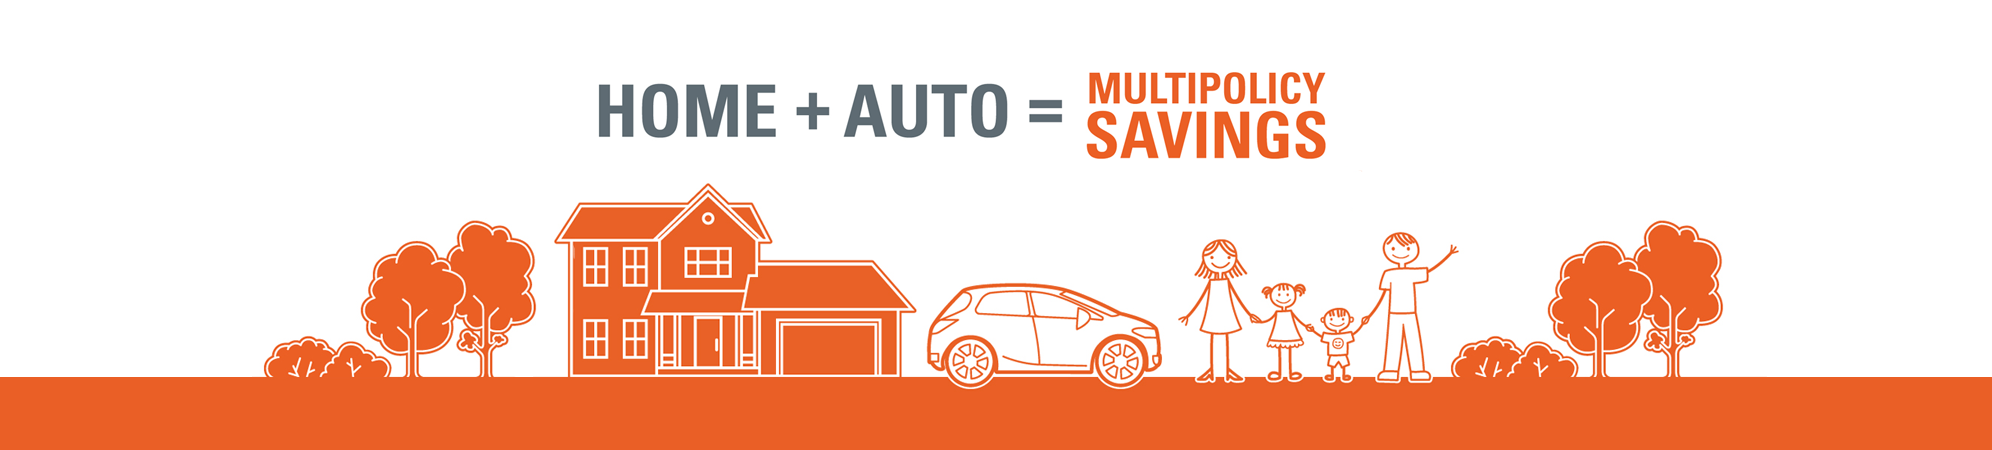 Home plus auto equals multipolicy savings